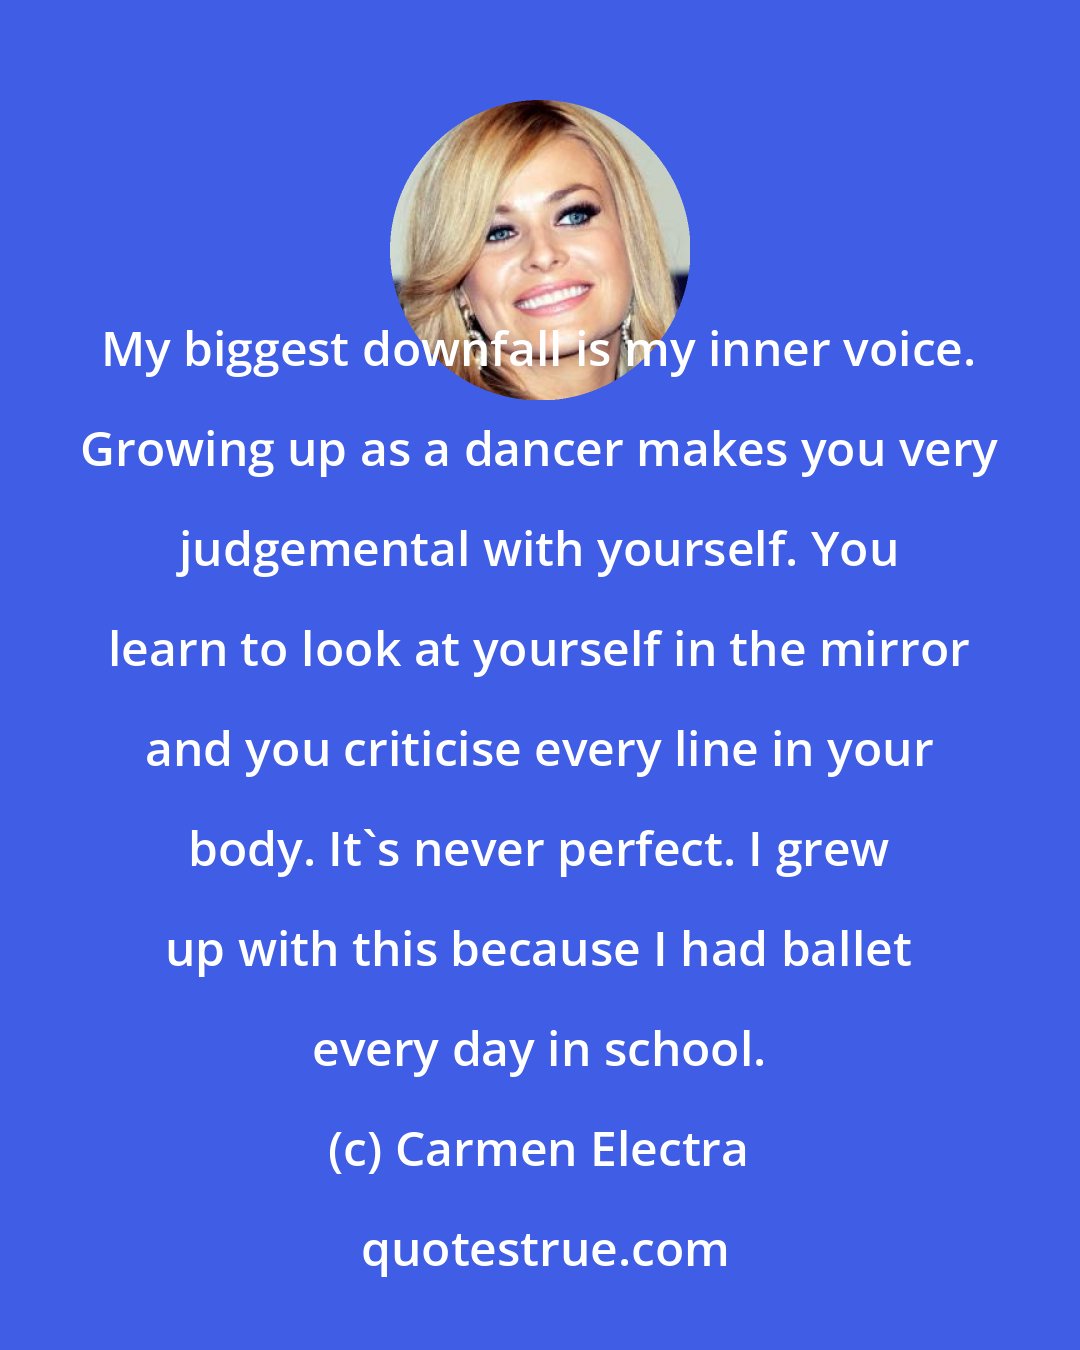 Carmen Electra: My biggest downfall is my inner voice. Growing up as a dancer makes you very judgemental with yourself. You learn to look at yourself in the mirror and you criticise every line in your body. It's never perfect. I grew up with this because I had ballet every day in school.